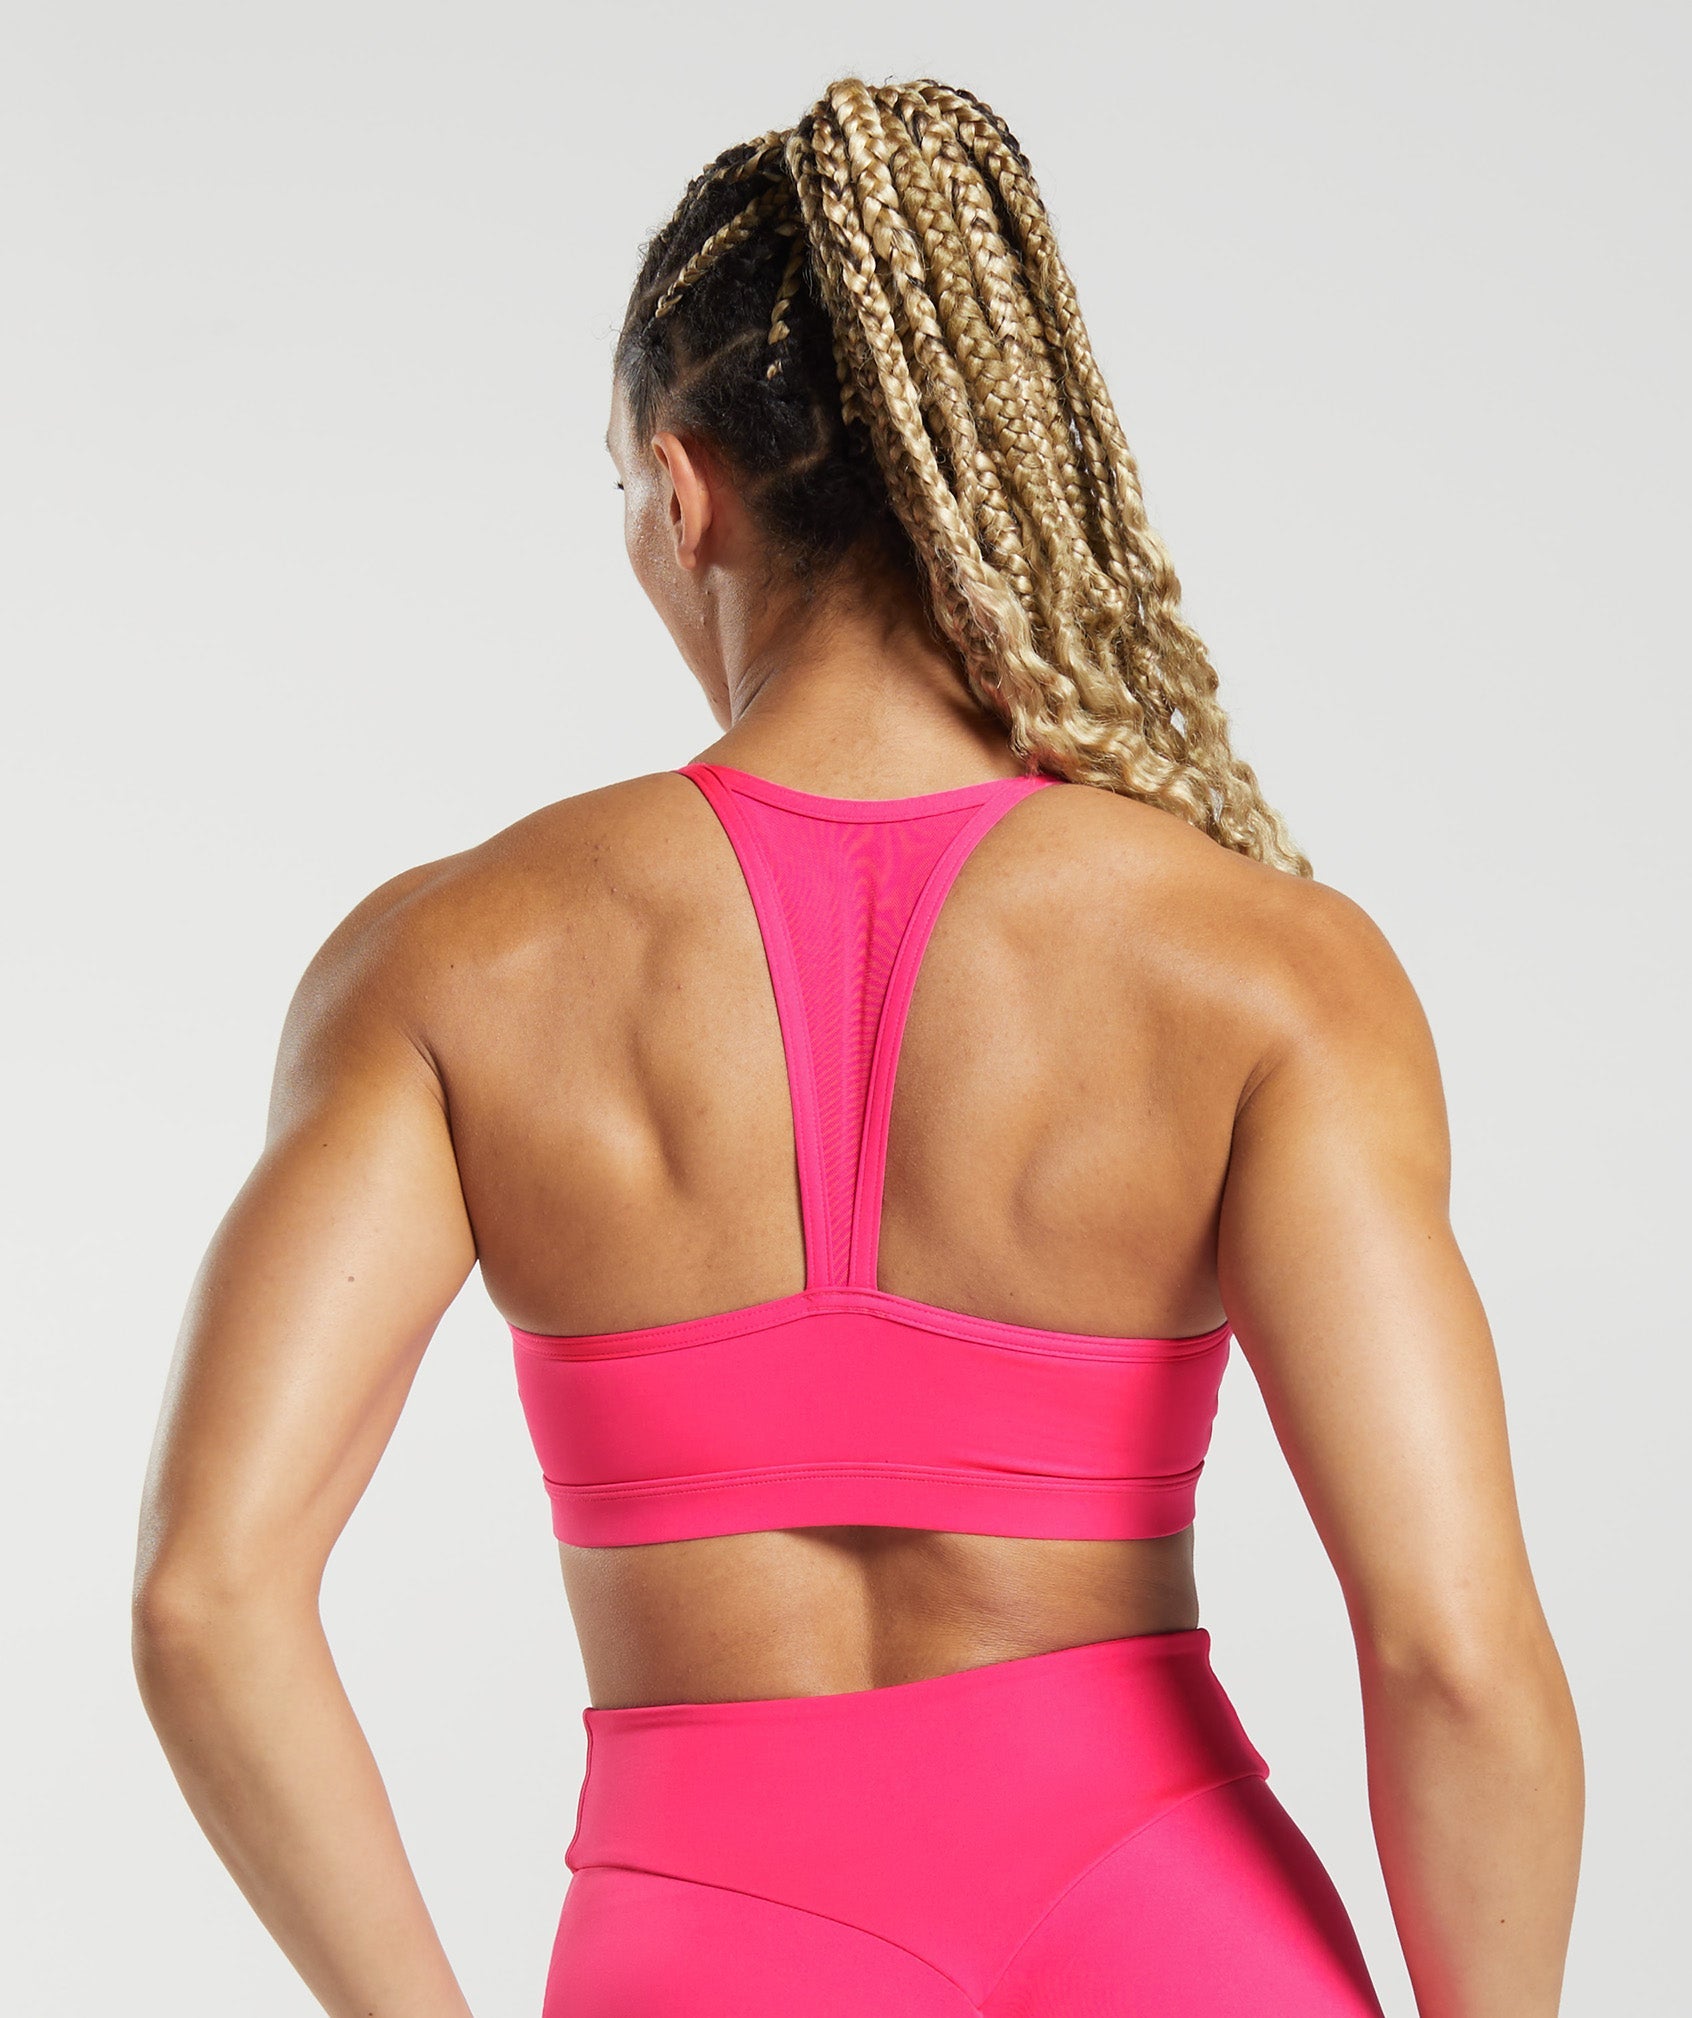 Gymshark Womens Sports Bra Size Small Rose Pink Strappy Captivate - $18 -  From Katie